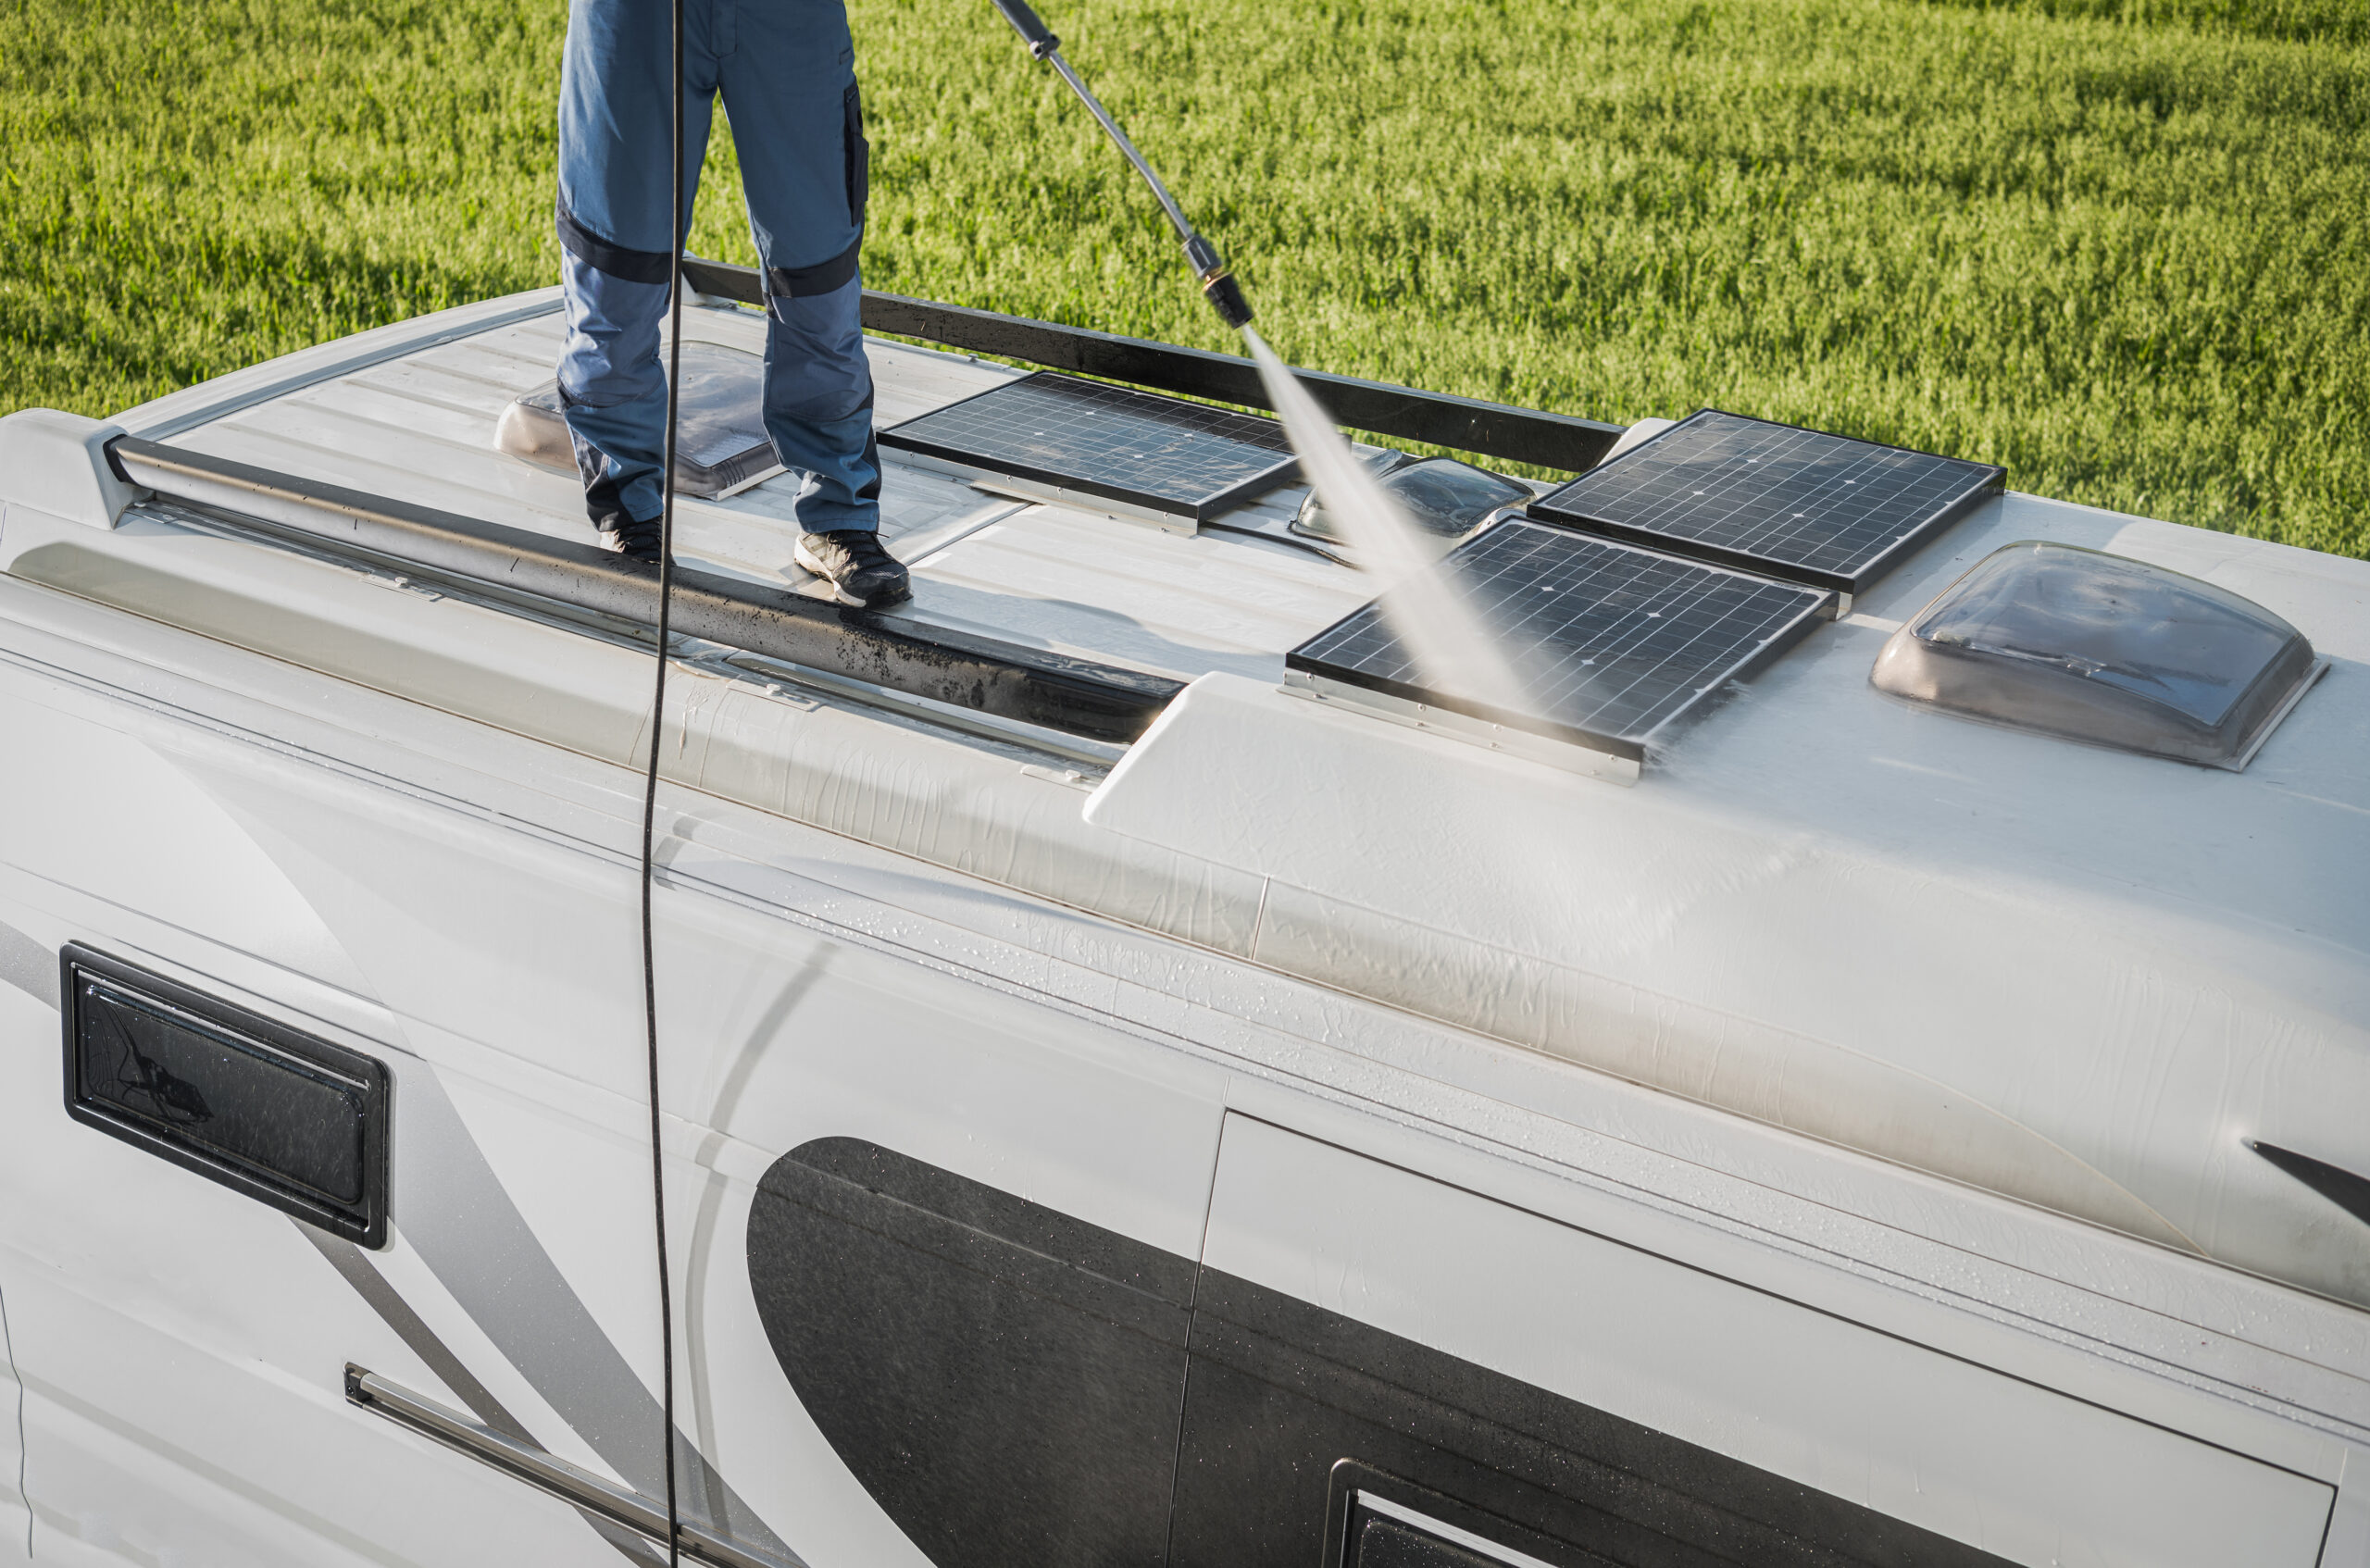 RV pressure washer on roof